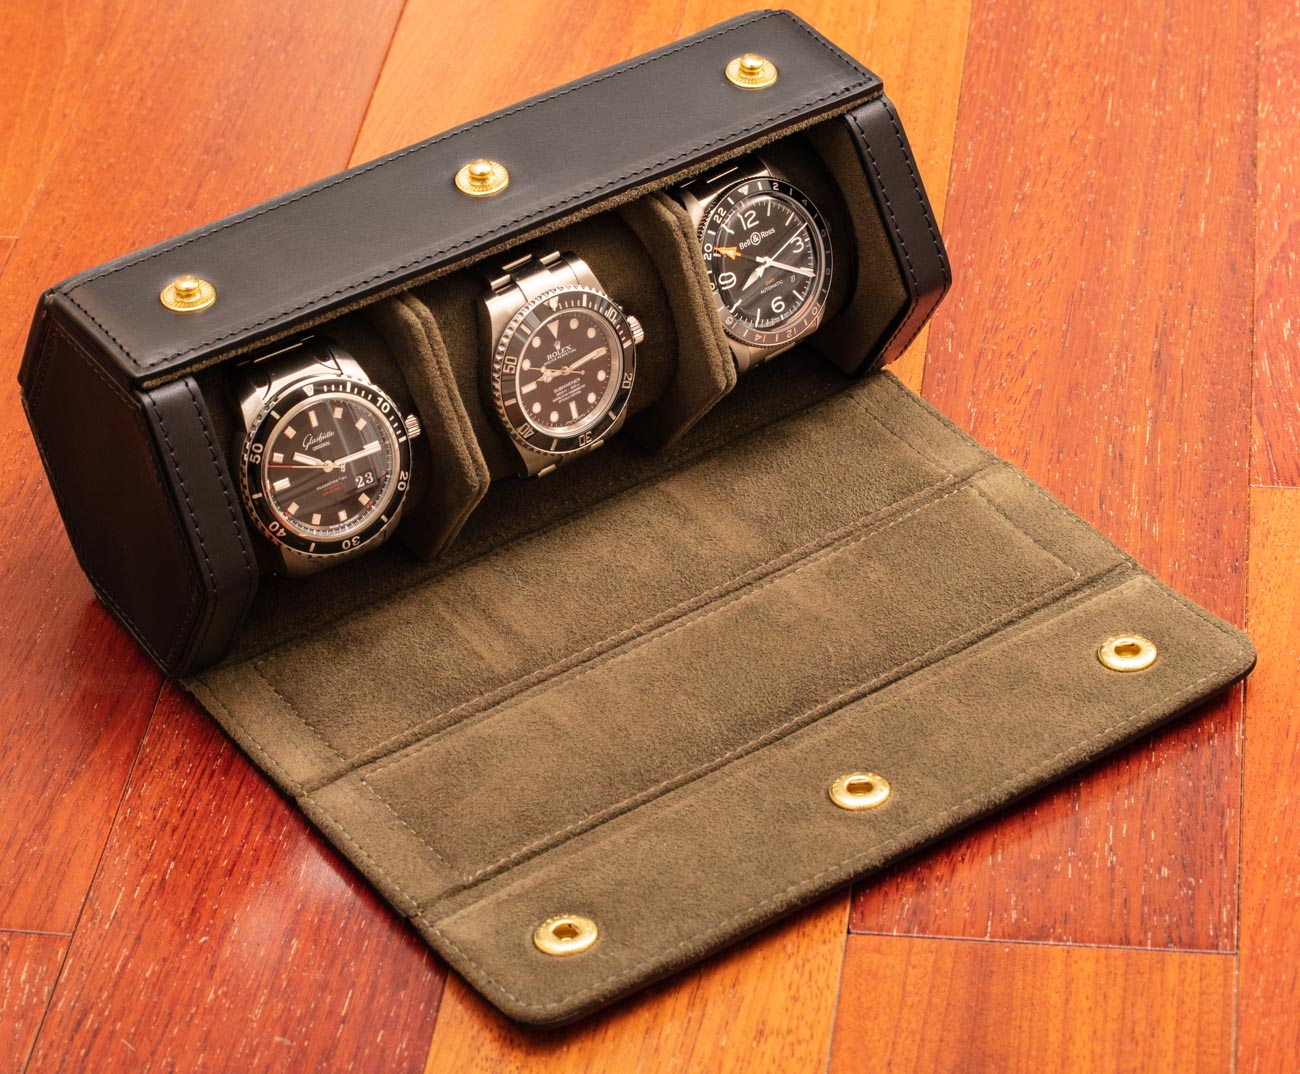 High quality leather watch rolls for up to three watches